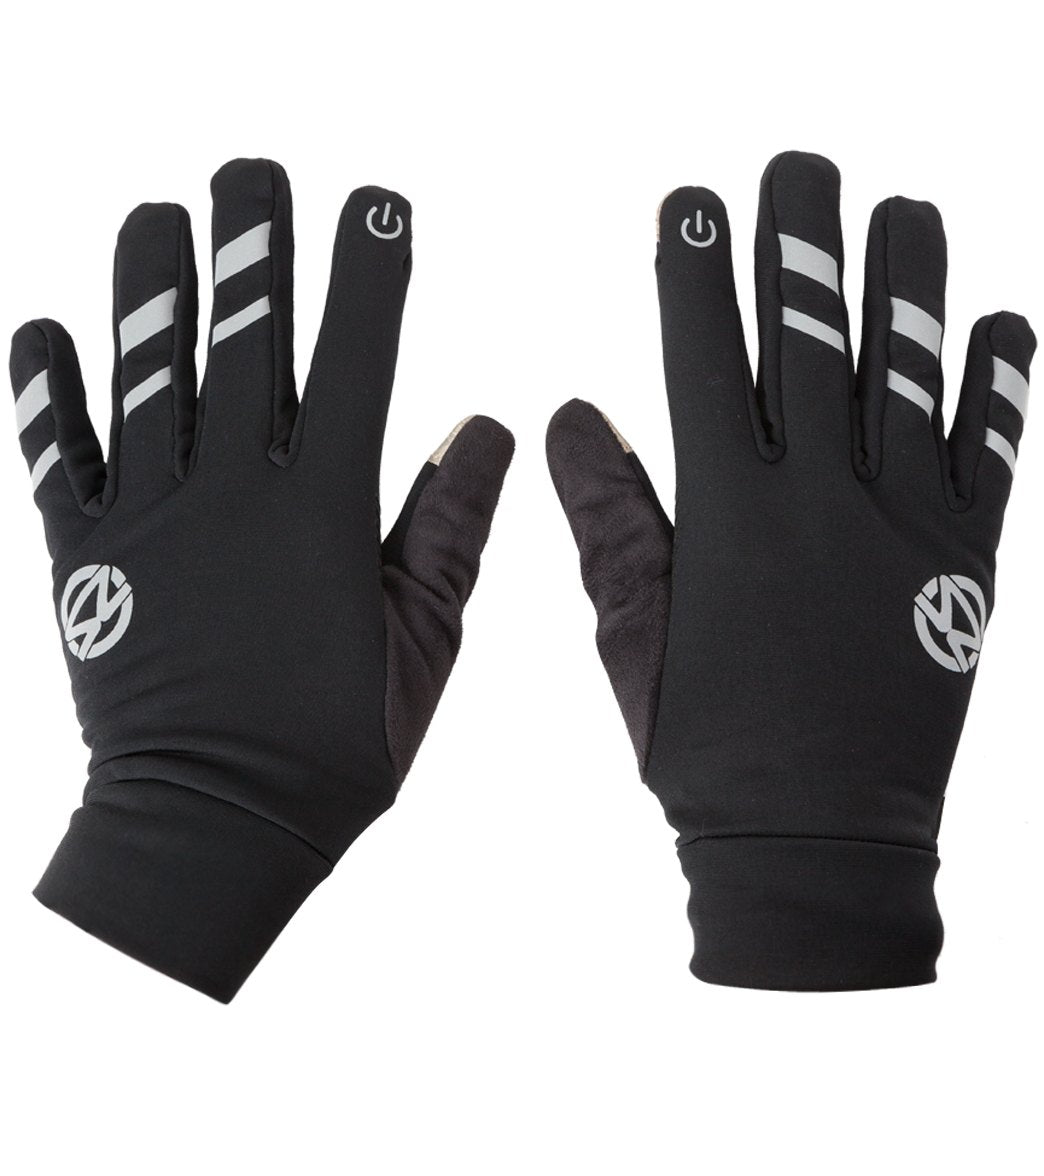 Zensah Smart Running Gloves With Touchscreen Capability - Black Small Size Small - Swimoutlet.com